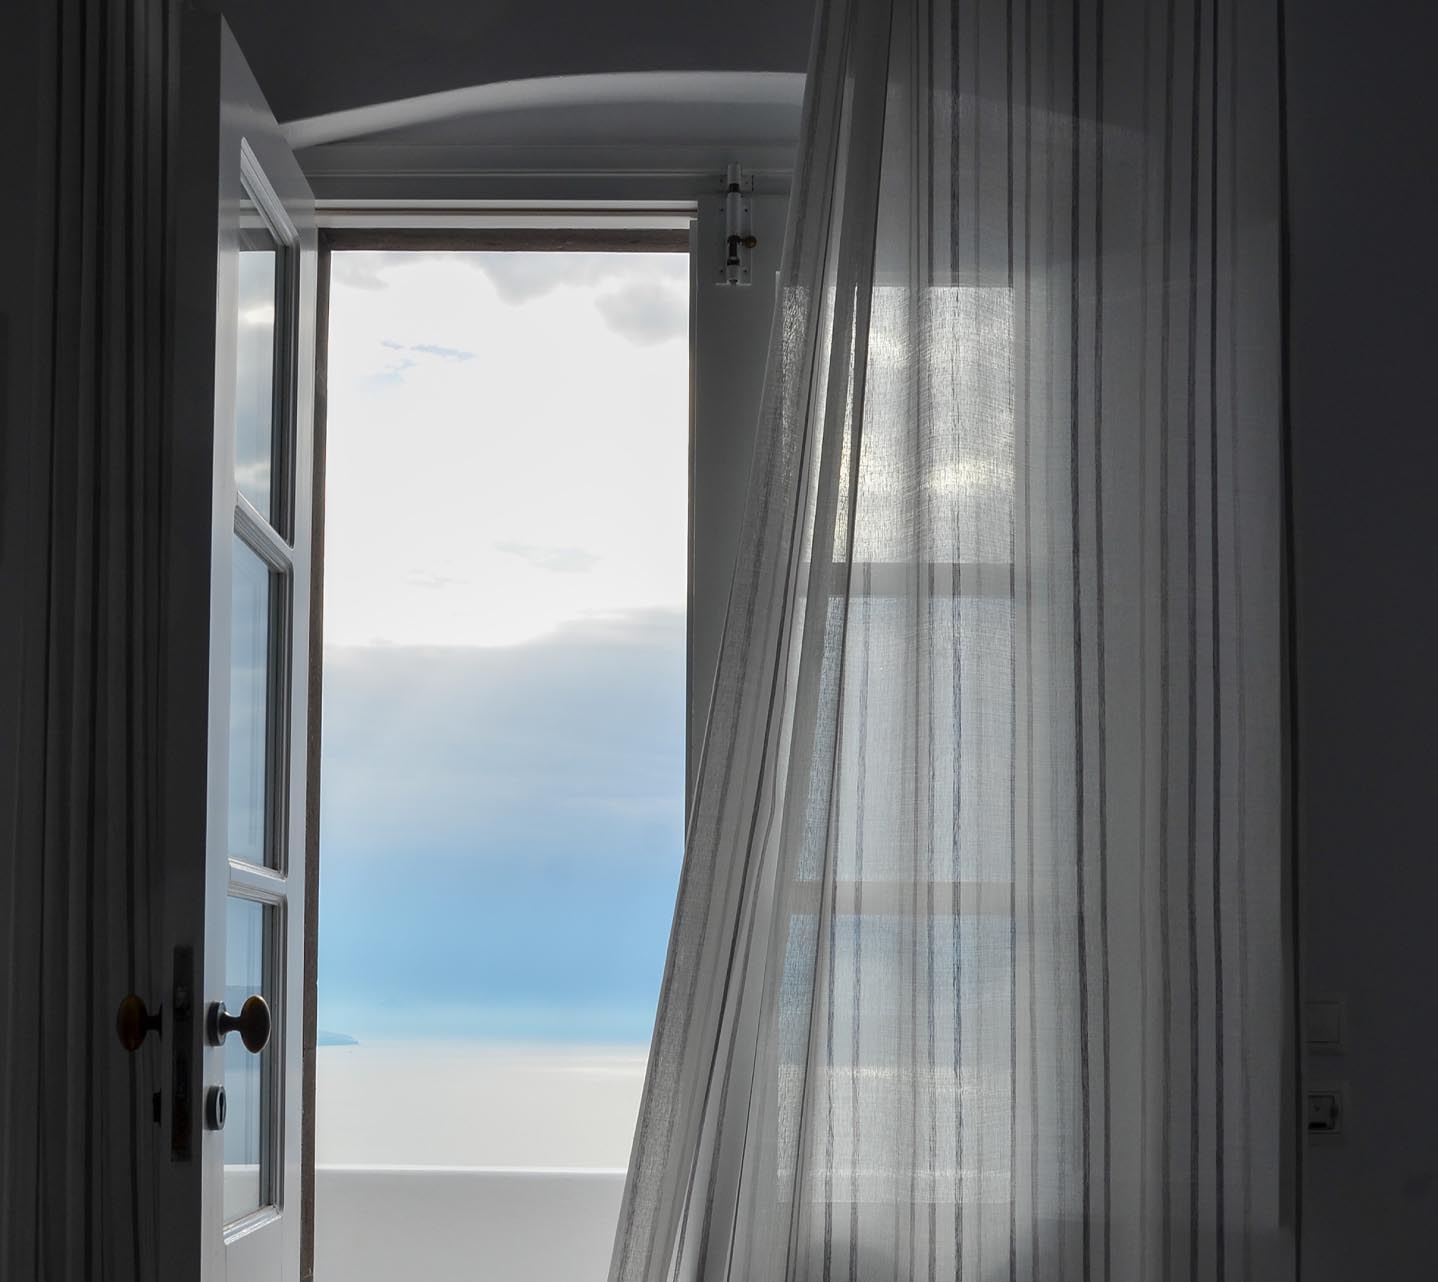 How to Hang Curtains for Windows